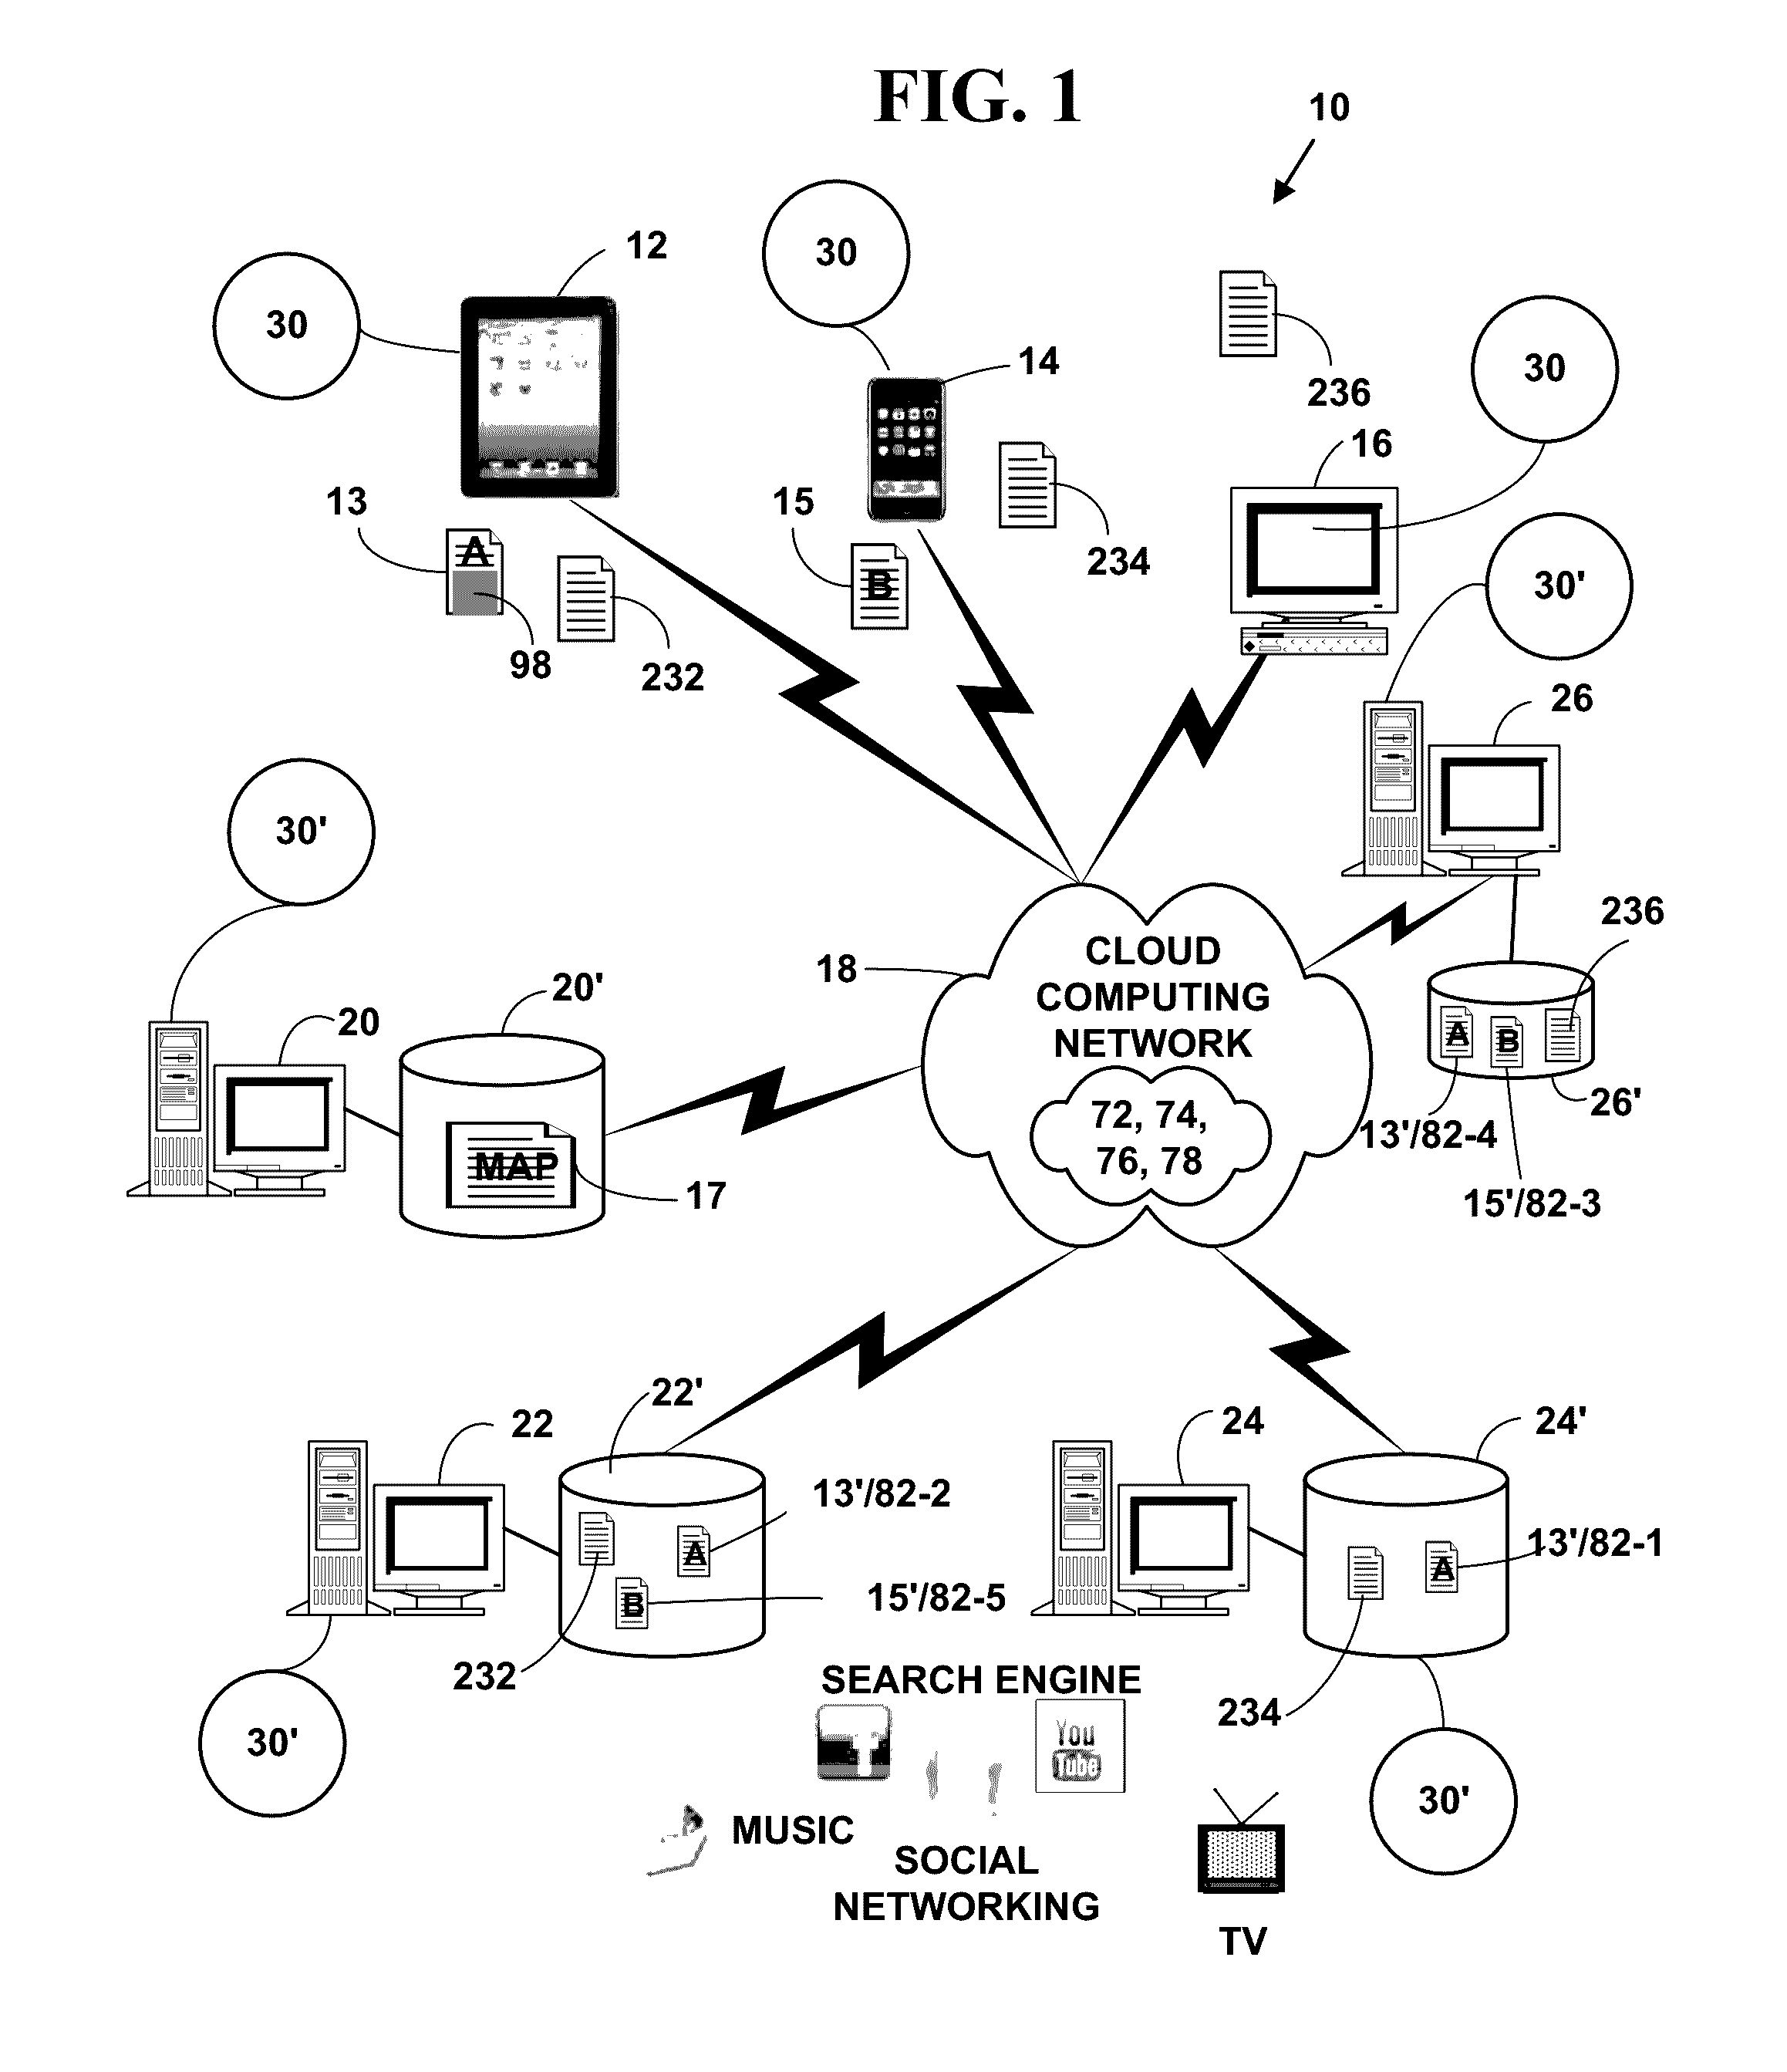 Method and system for storage and retrieval of blockchain blocks using galois fields